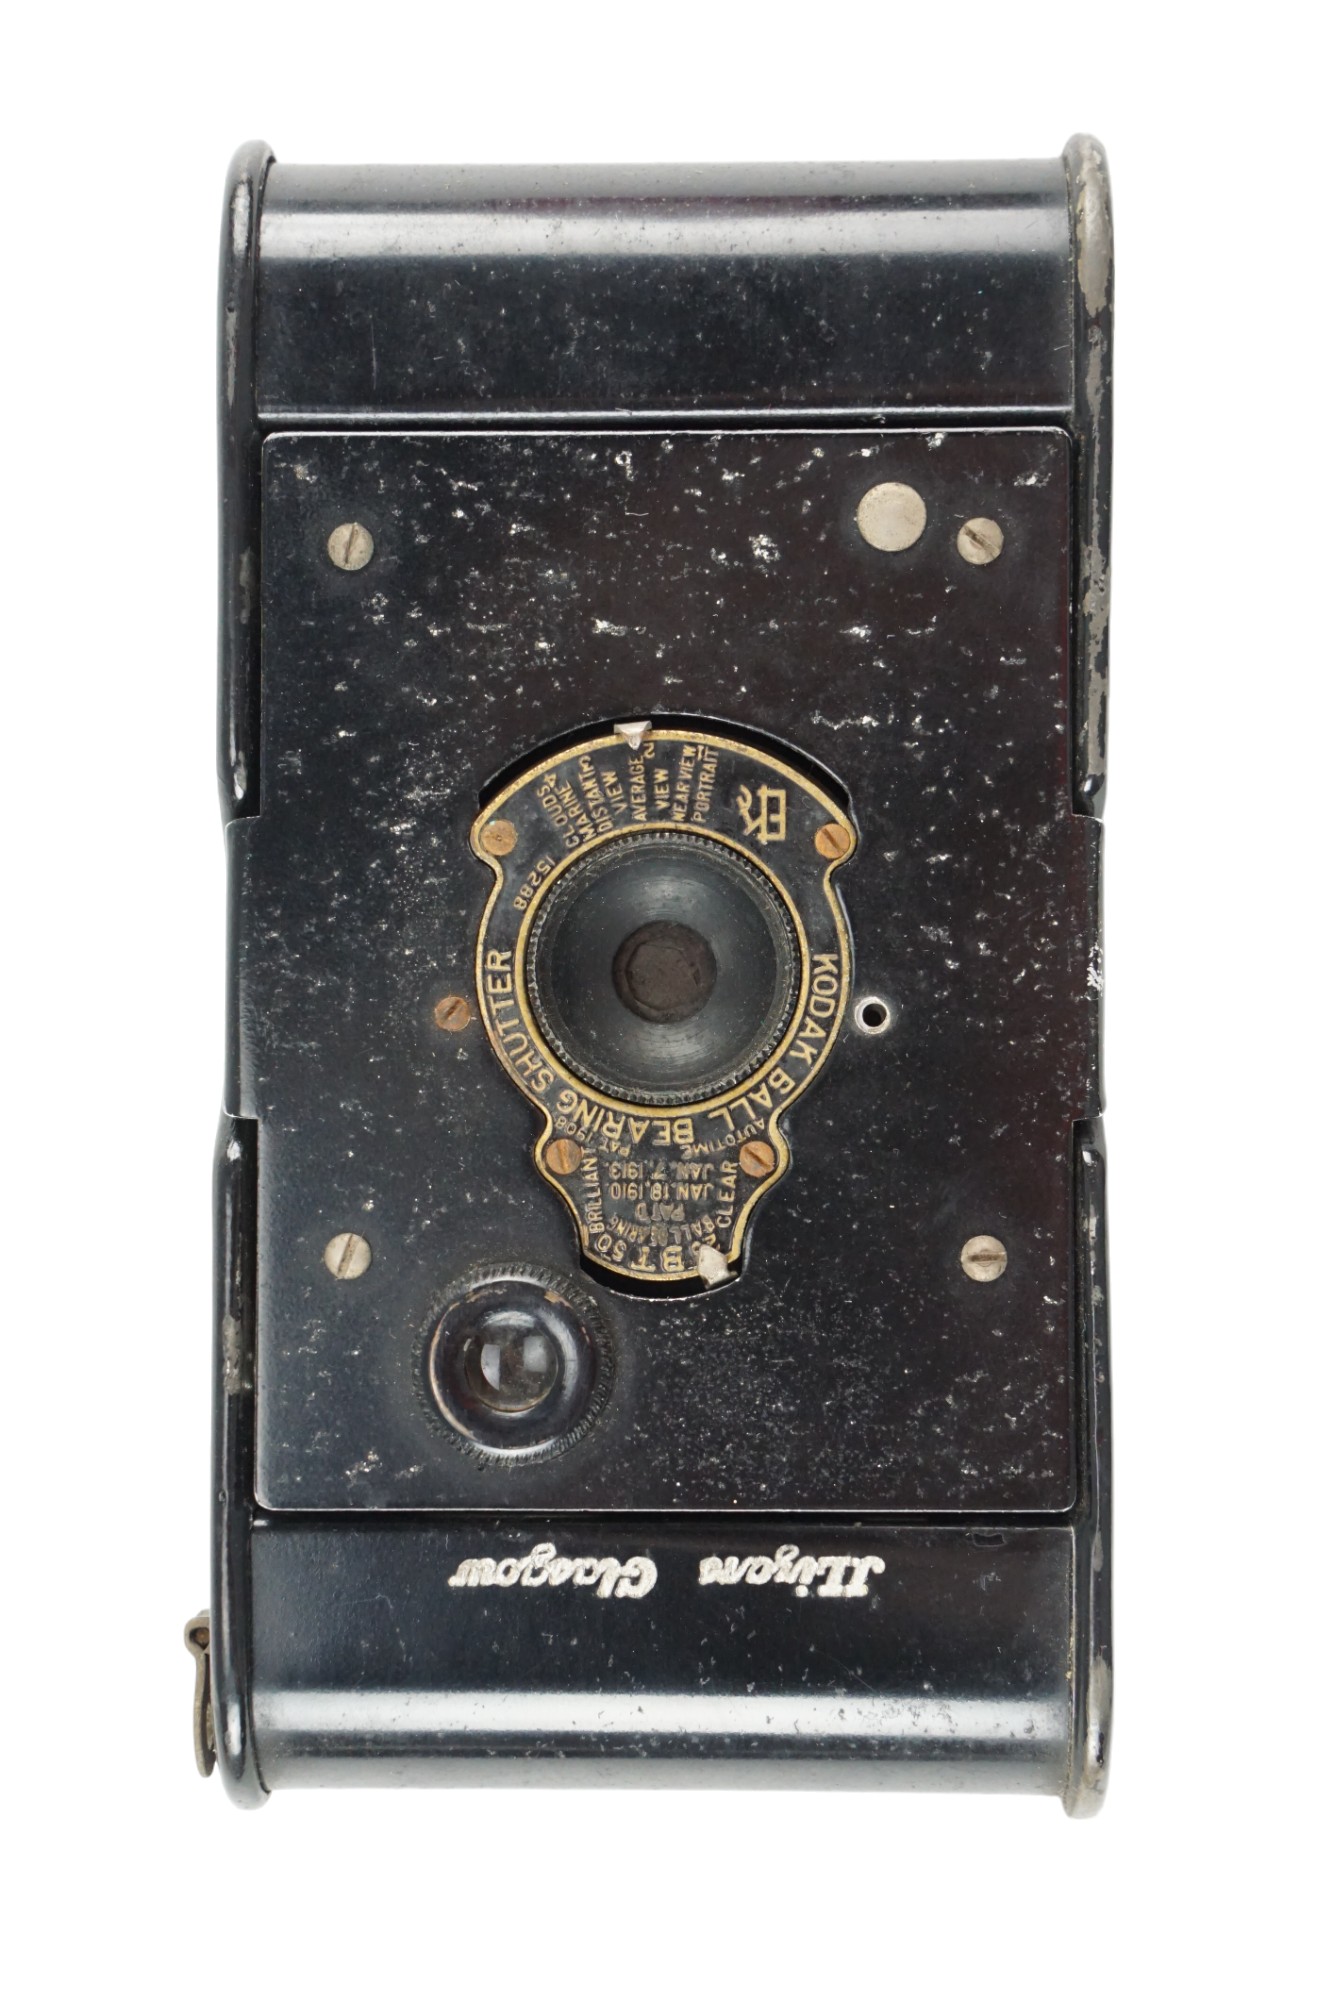 A Great War period Kodak Vest Pocket Camera. [The VPC was widely advertised as ‘The Soldier’s Kodak’ - Image 4 of 5